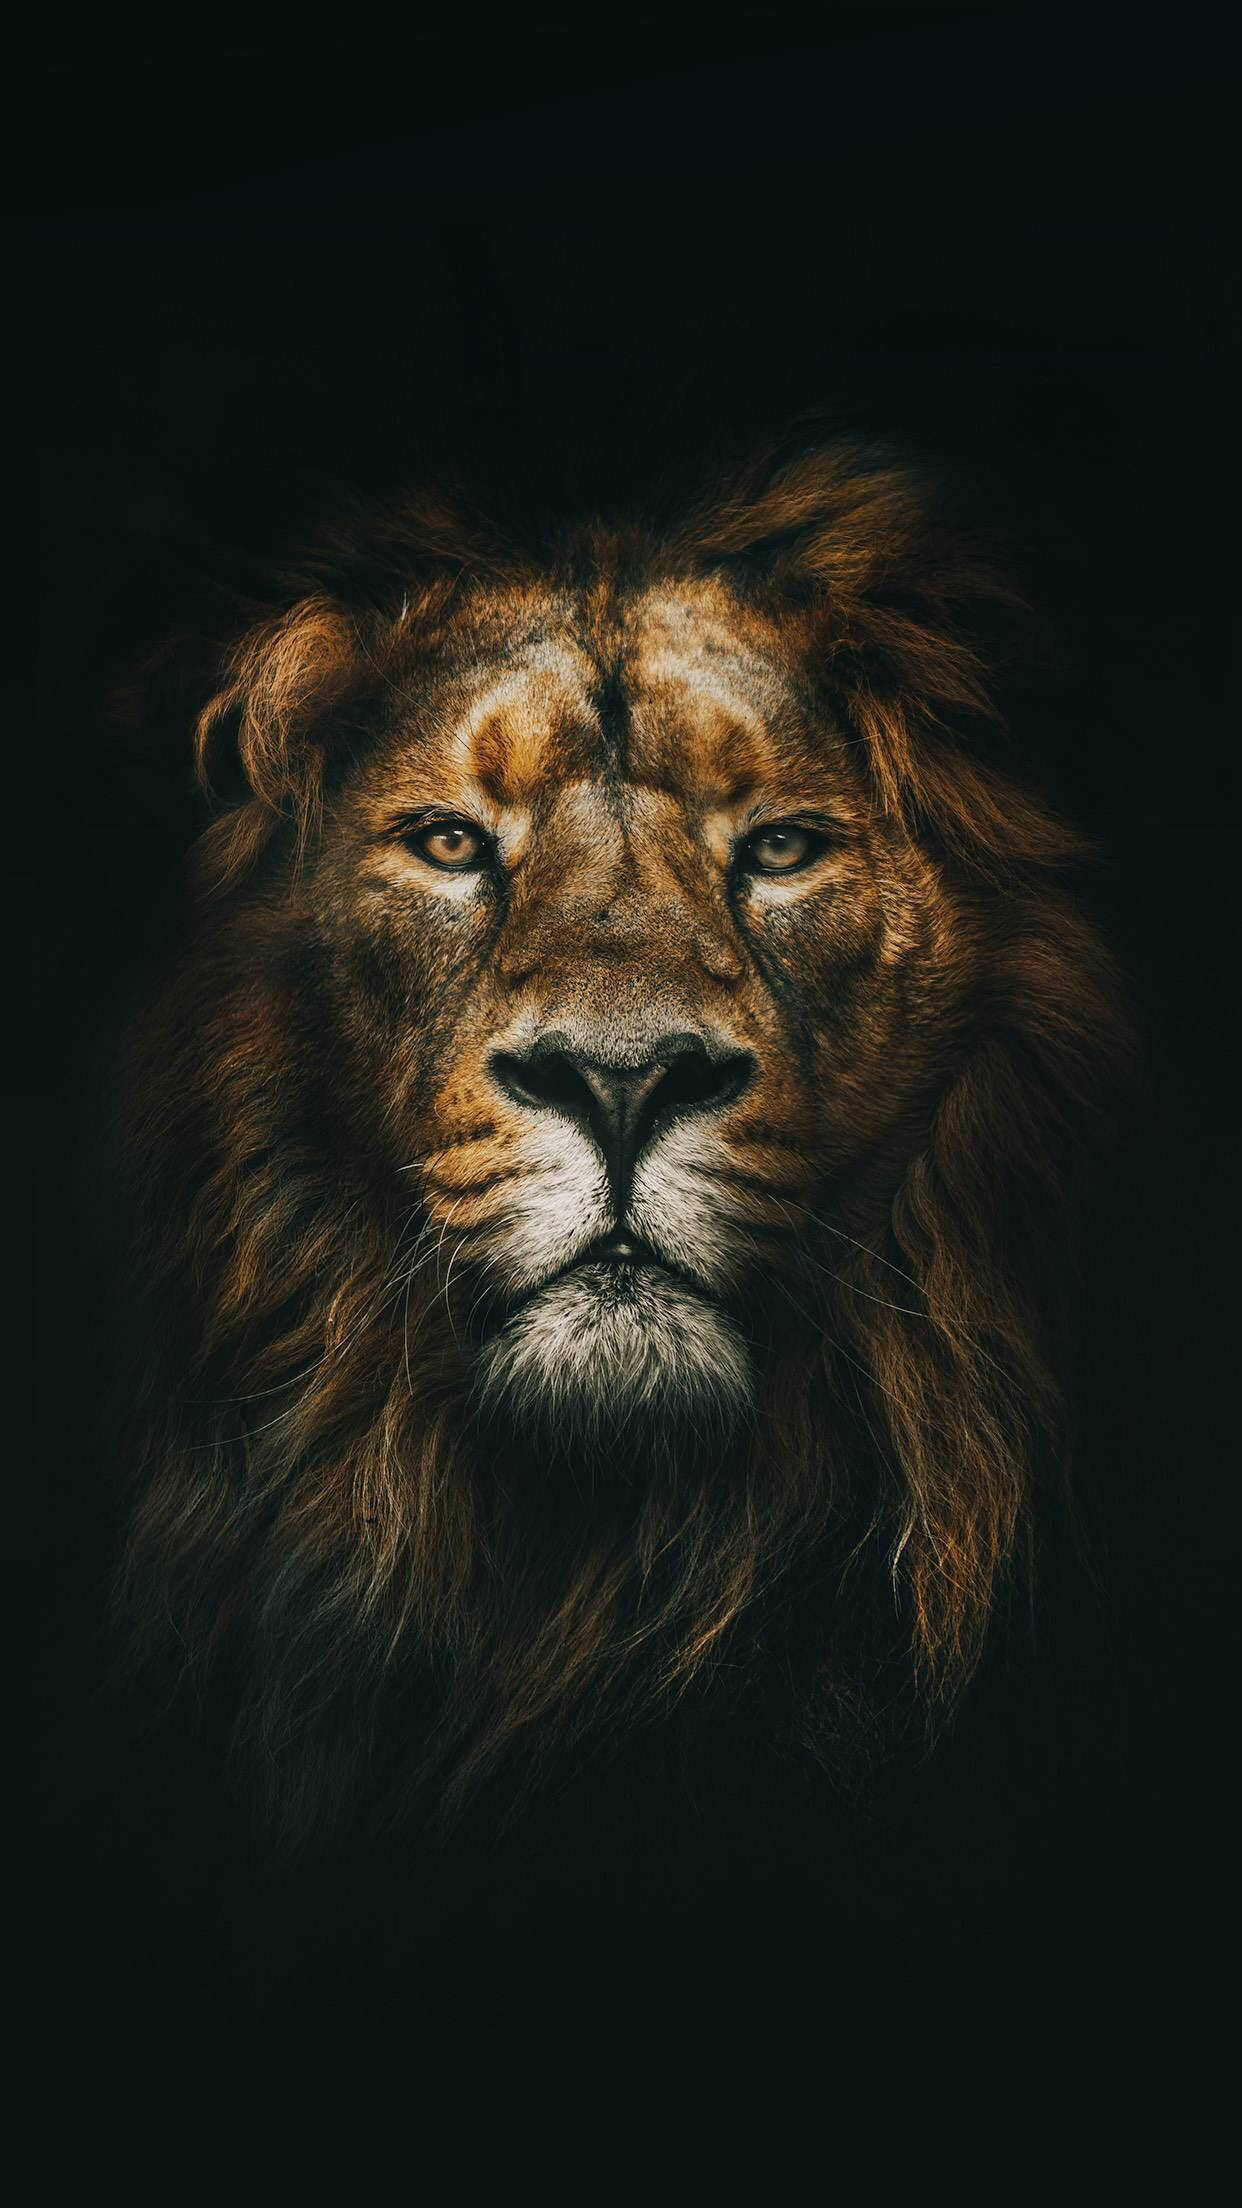 Unleash Your Inner Beast with The Fierce Lion iPhone Wallpaper Wallpaper